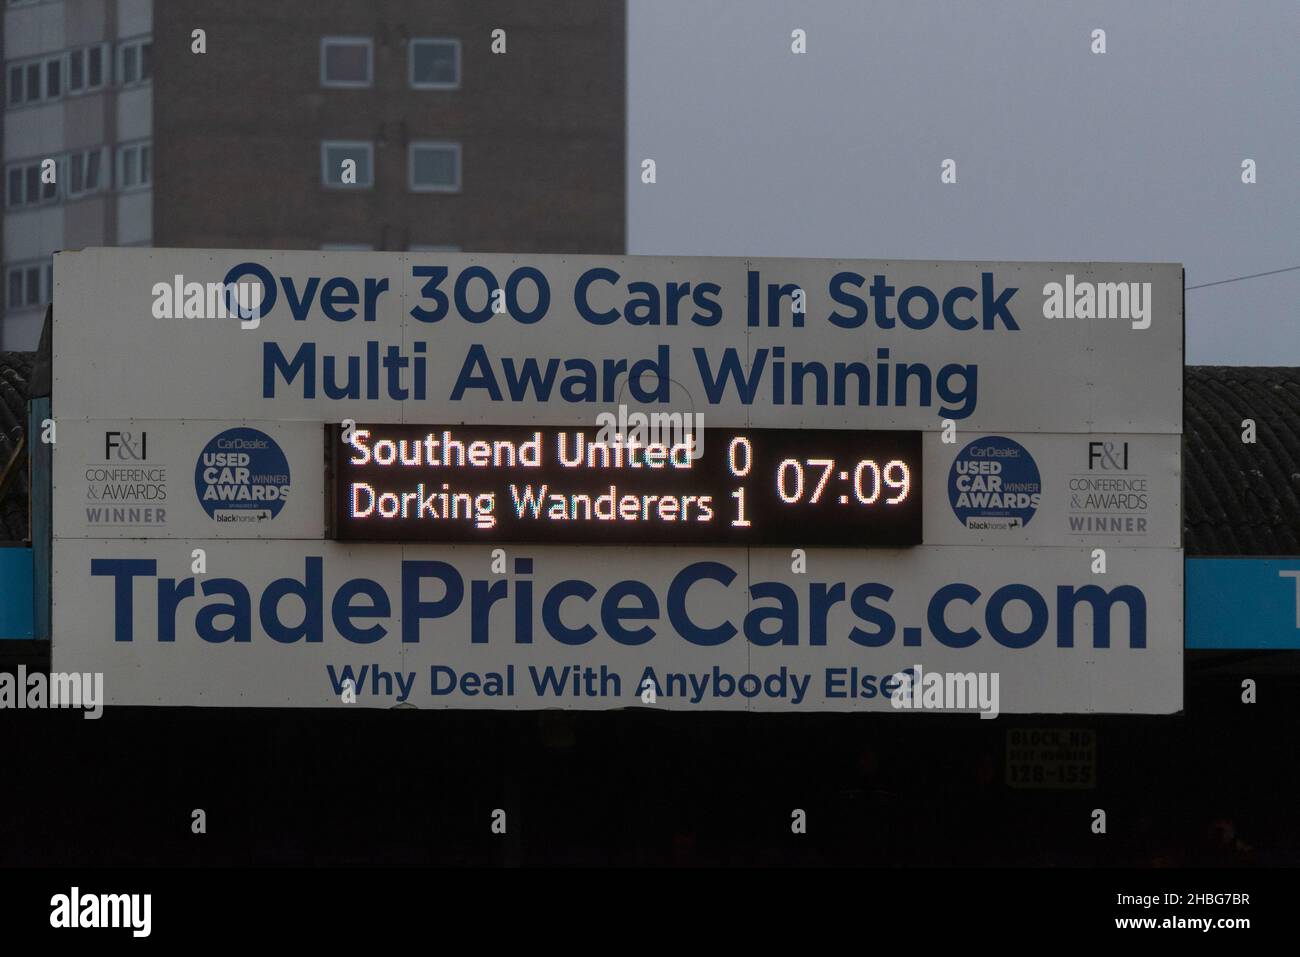 FA Trophy 3rd round at Roots Hall, Southend United v Dorking Wanderers football match on a grim, rainy cold winter day. Digital scoreboard, goal down Stock Photo